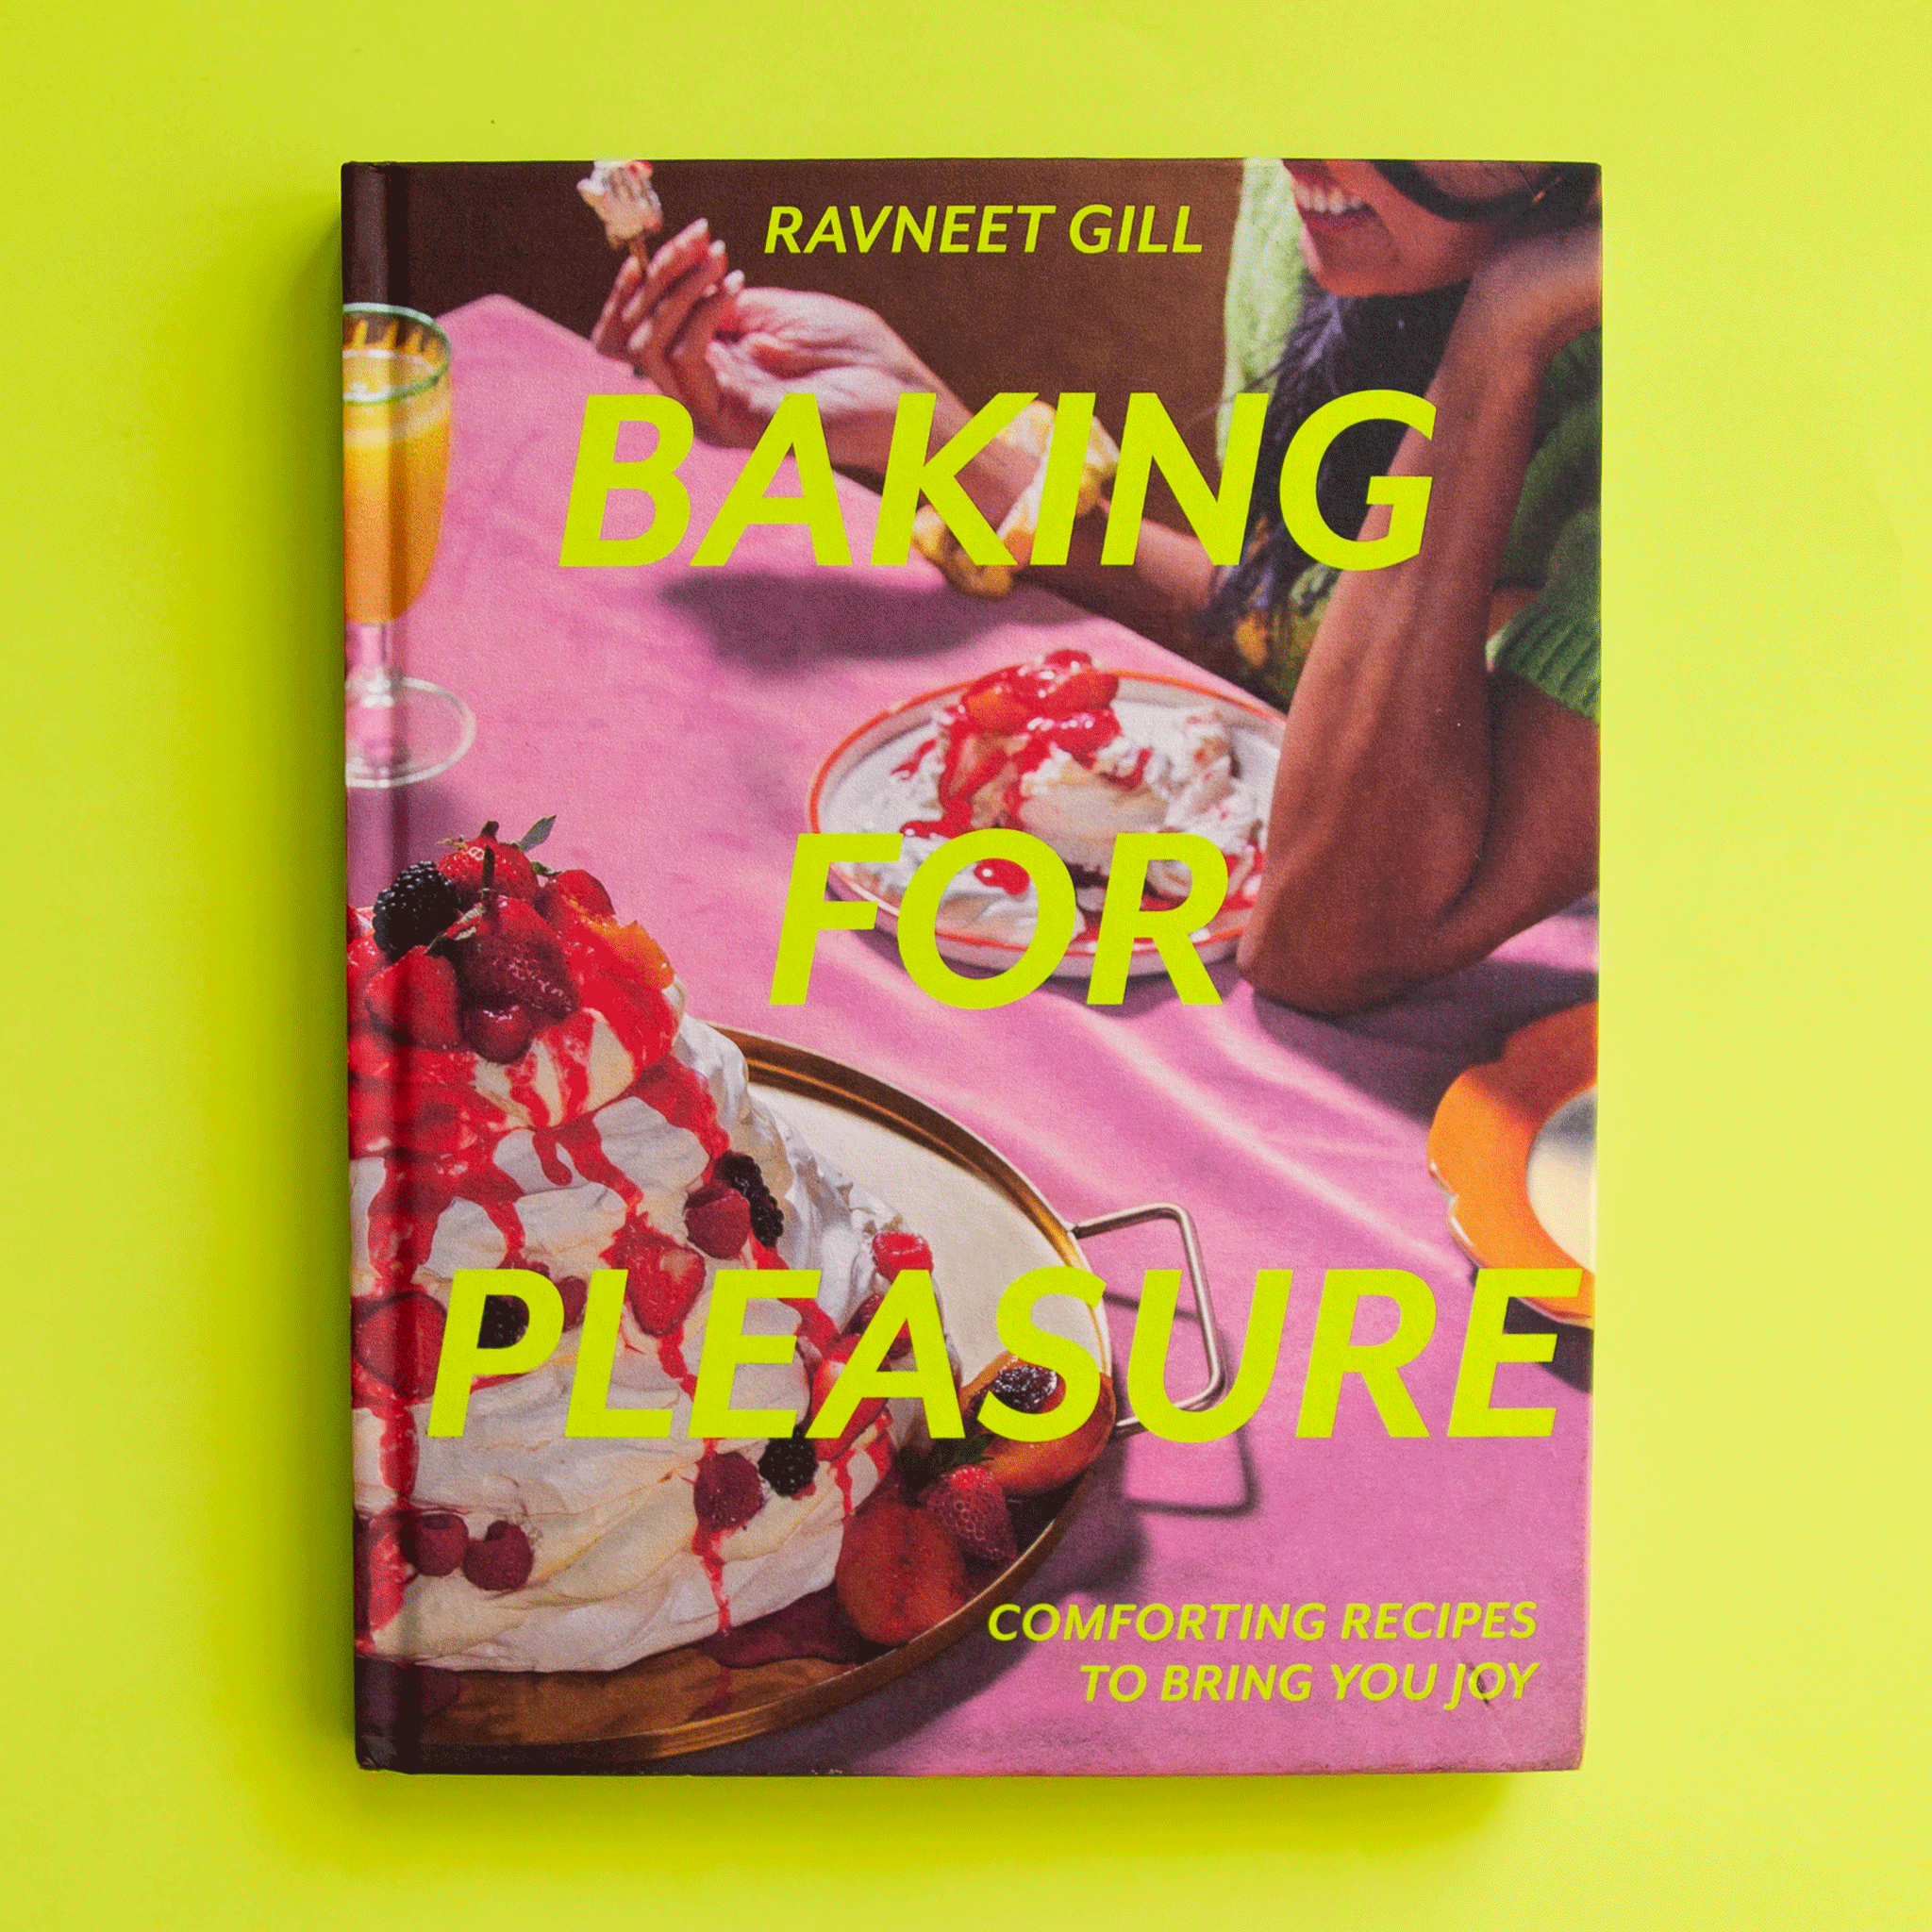 On a green background is a hot pink book cover with desserts on the front and yellow text that reads, "Baking For Pleasure".